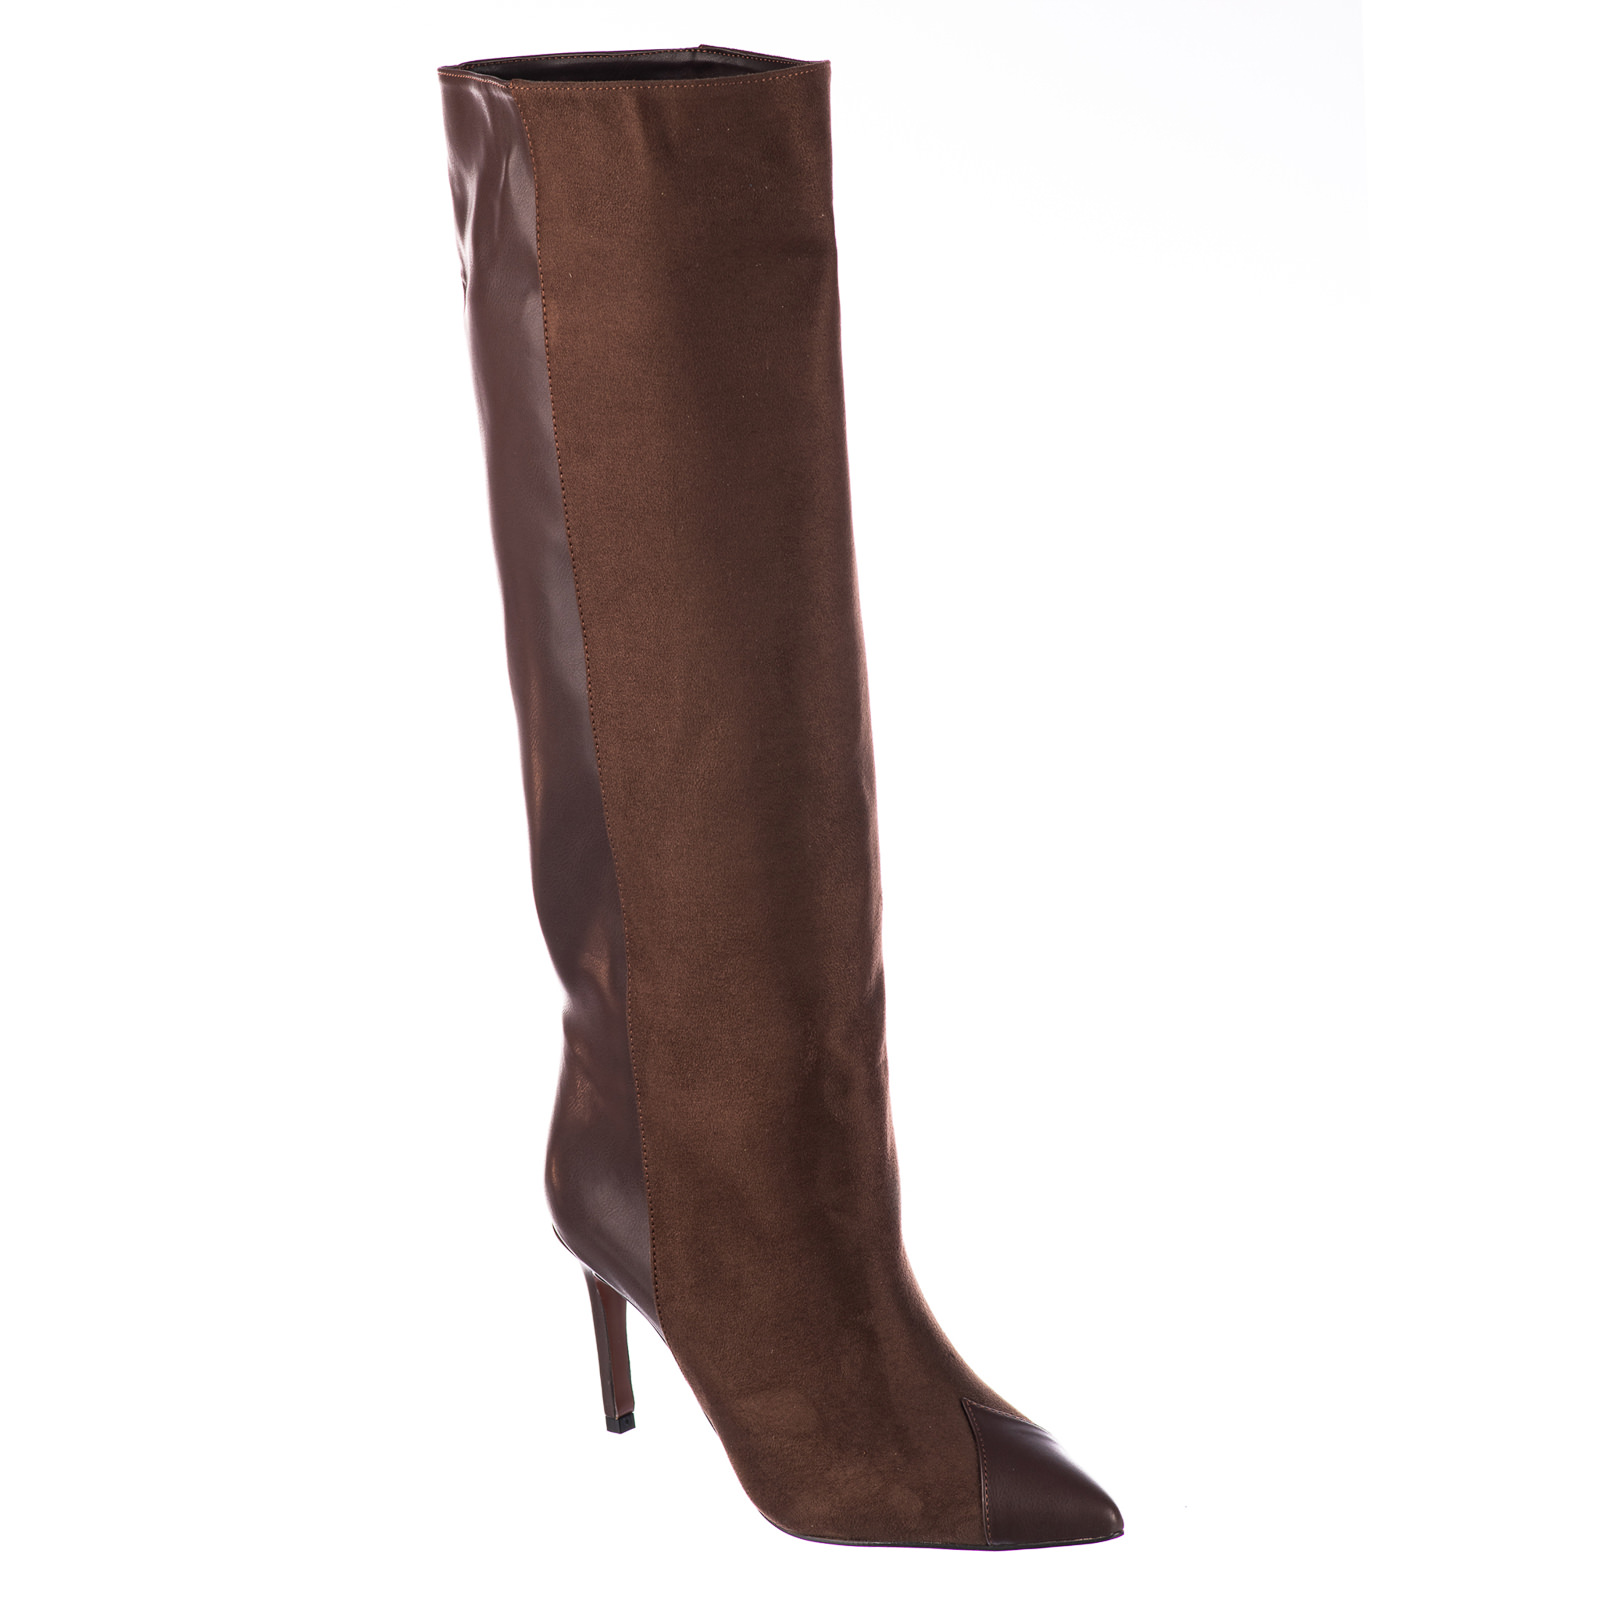 Leather boots B730 - BROWN